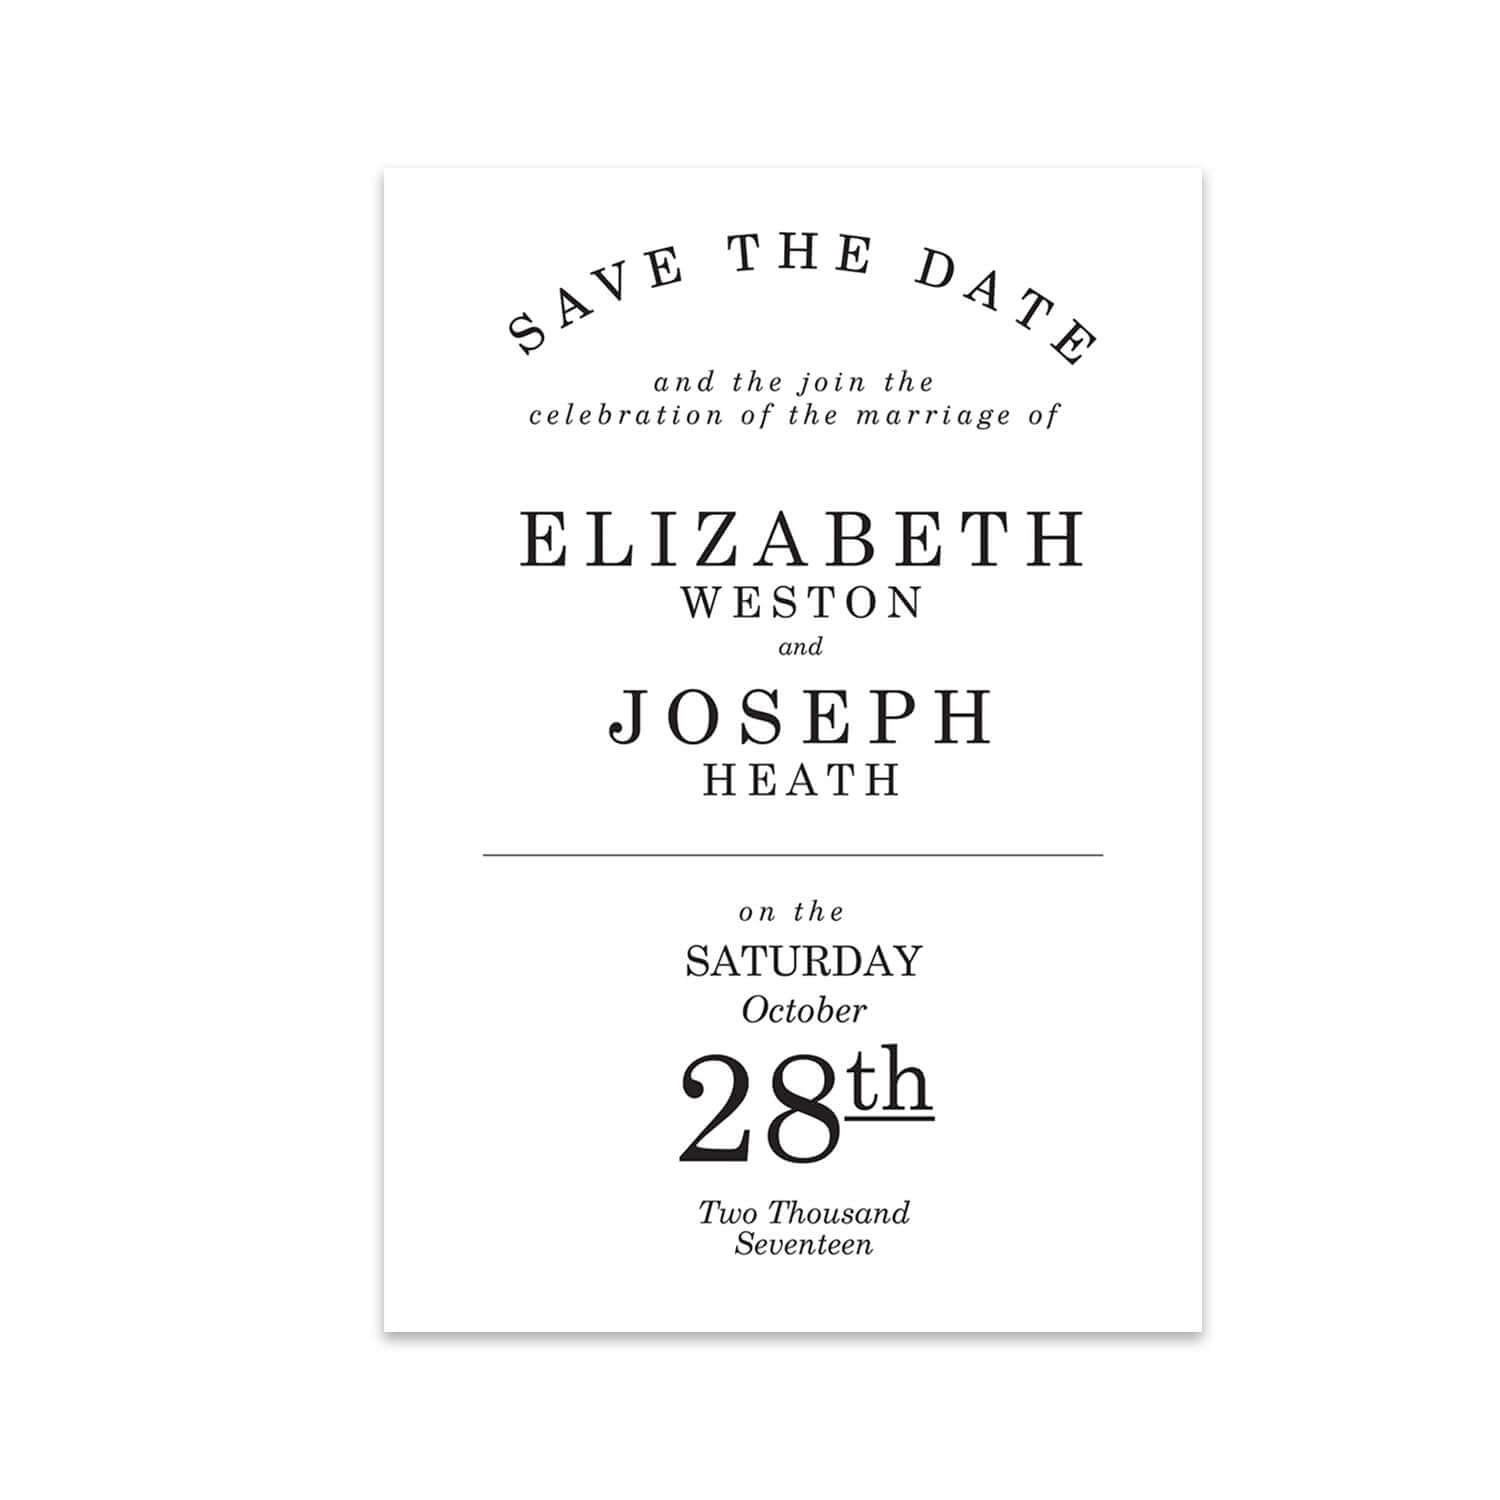 Gatsby Grand Save the Date A6 Cards Wedding Stationery Mustard and Gray Ltd Shropshire UK